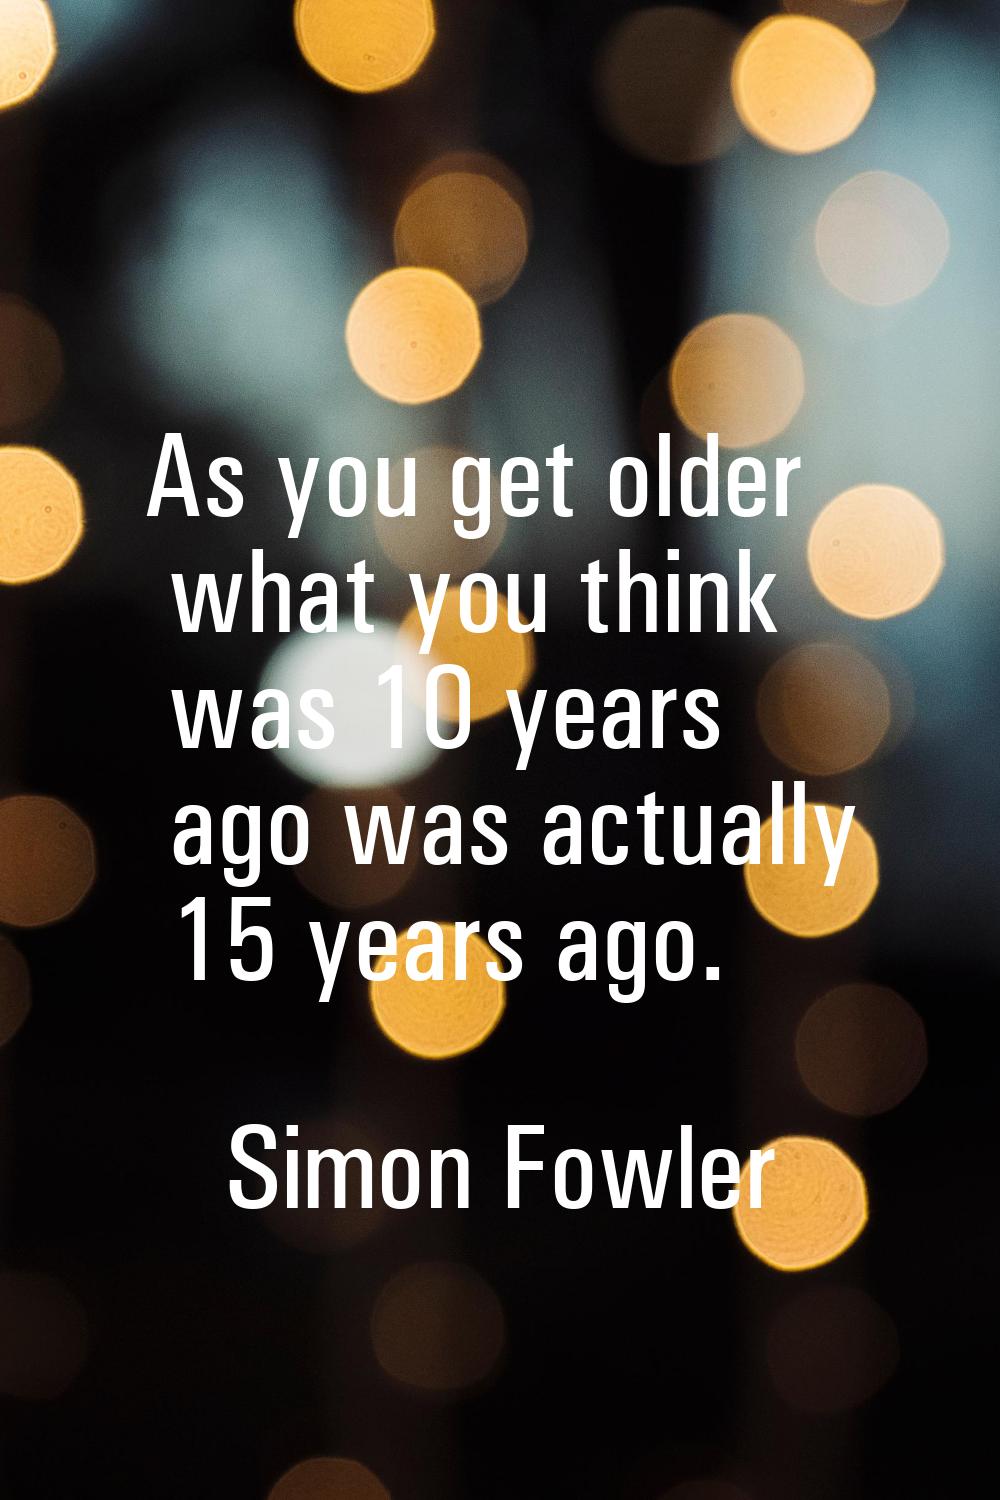 As you get older what you think was 10 years ago was actually 15 years ago.